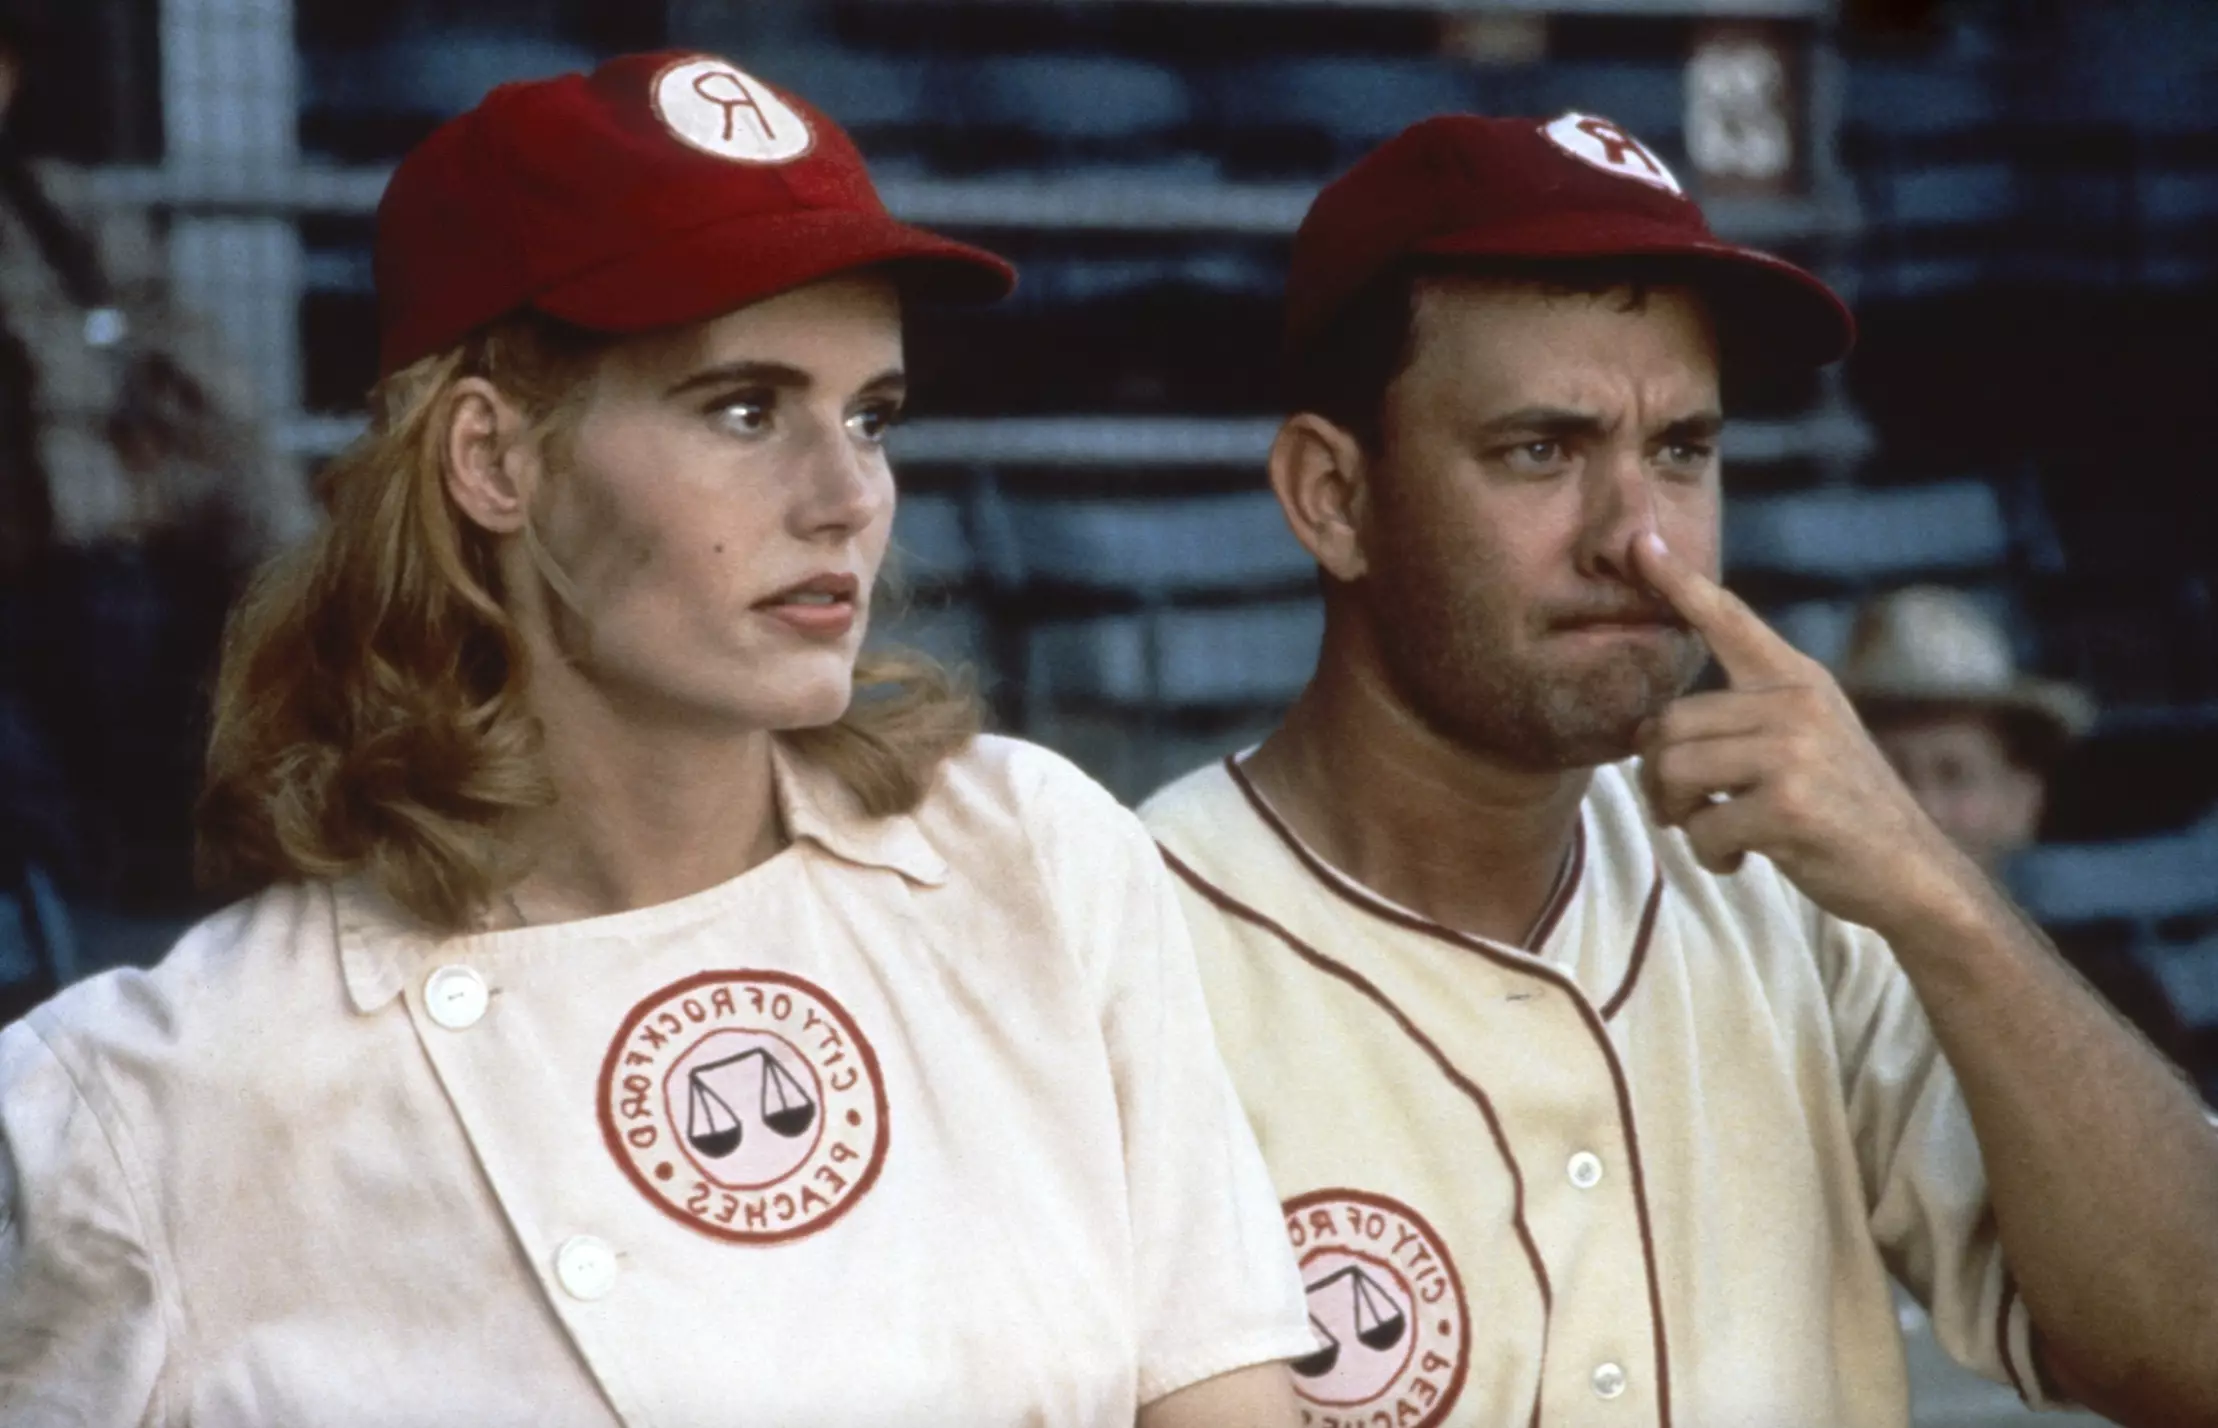 Hanks in A League of Their Own.